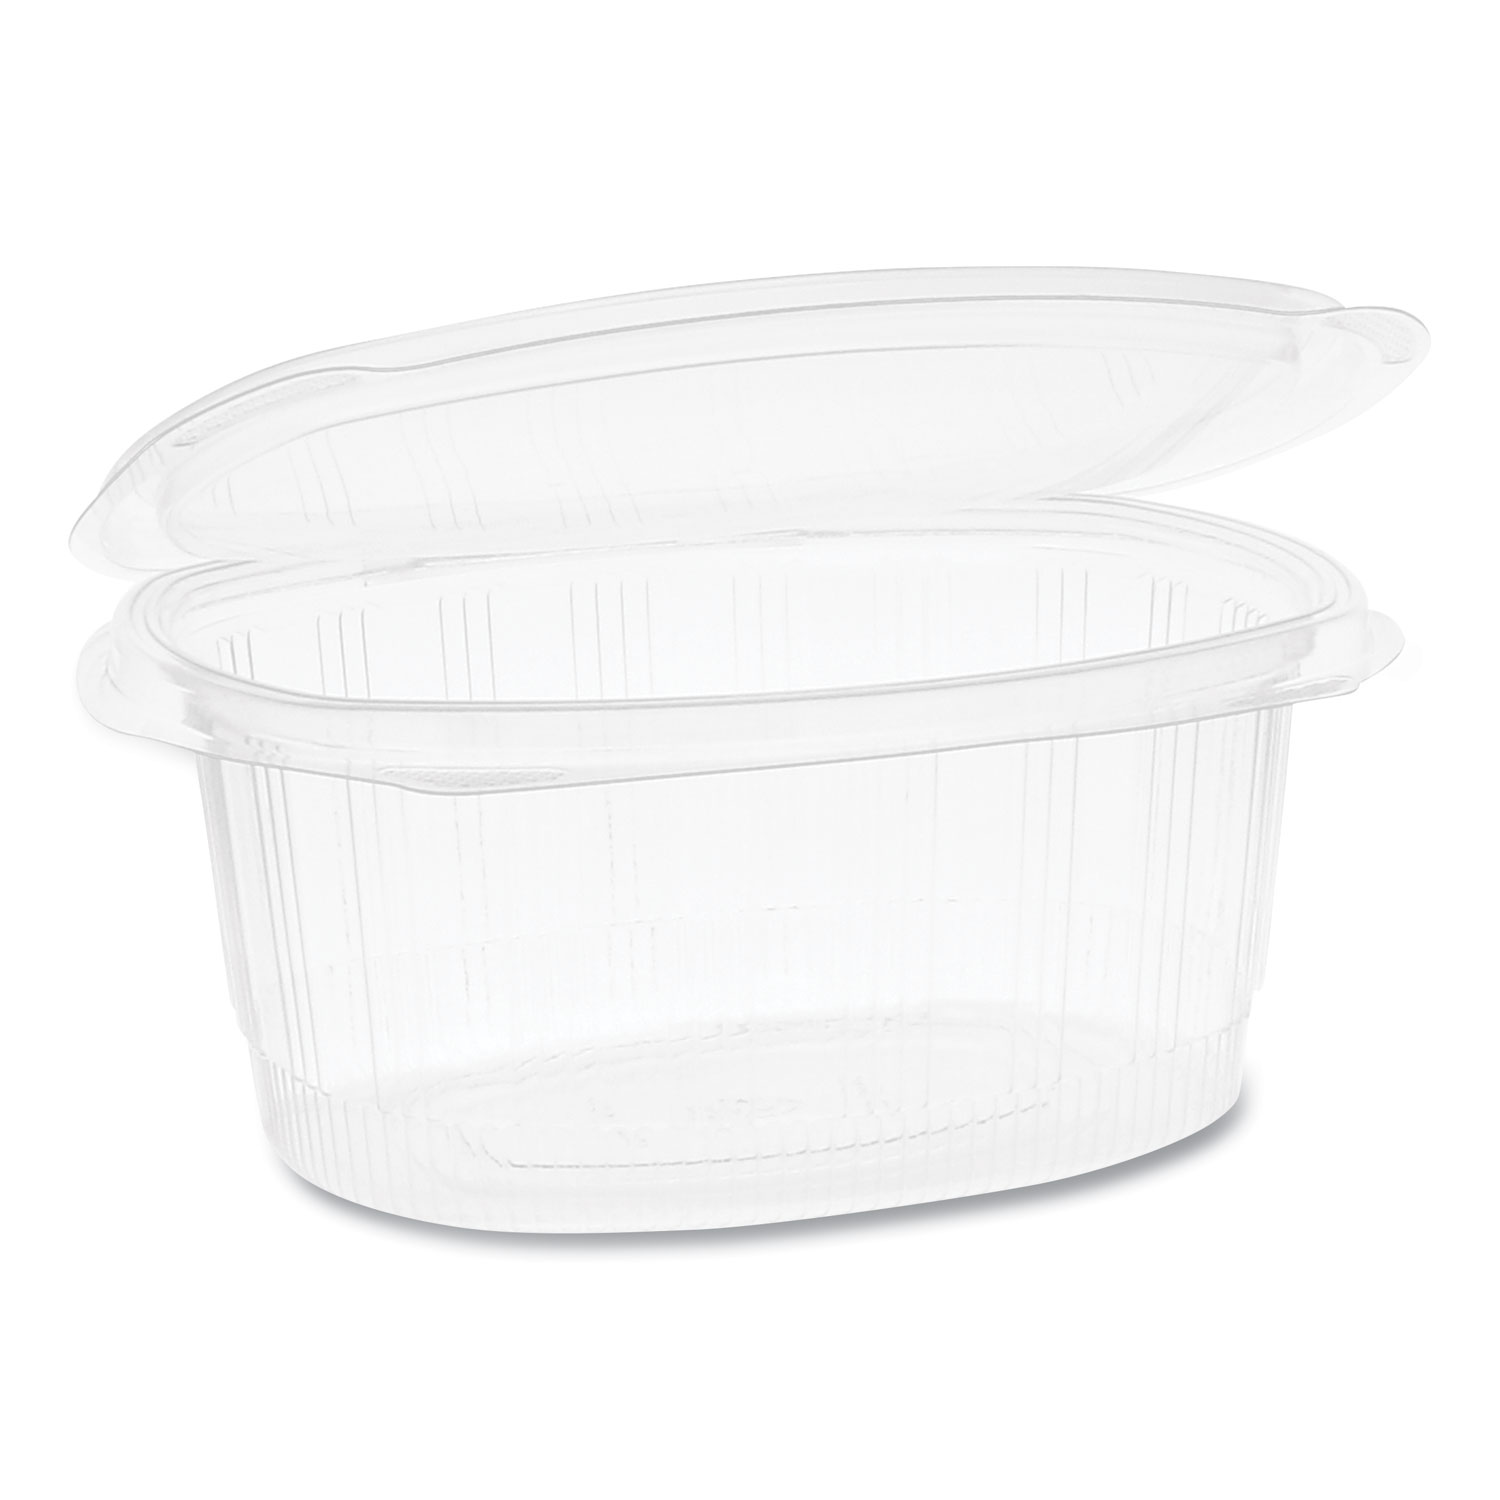  Pactiv YCA910320000 EarthChoice PET Hinged Lid Deli Container, 7.31 x 5.88 x 3.25, 32 oz, 1-Compartment, Clear, 280/Carton (PCTYCA910320000) 